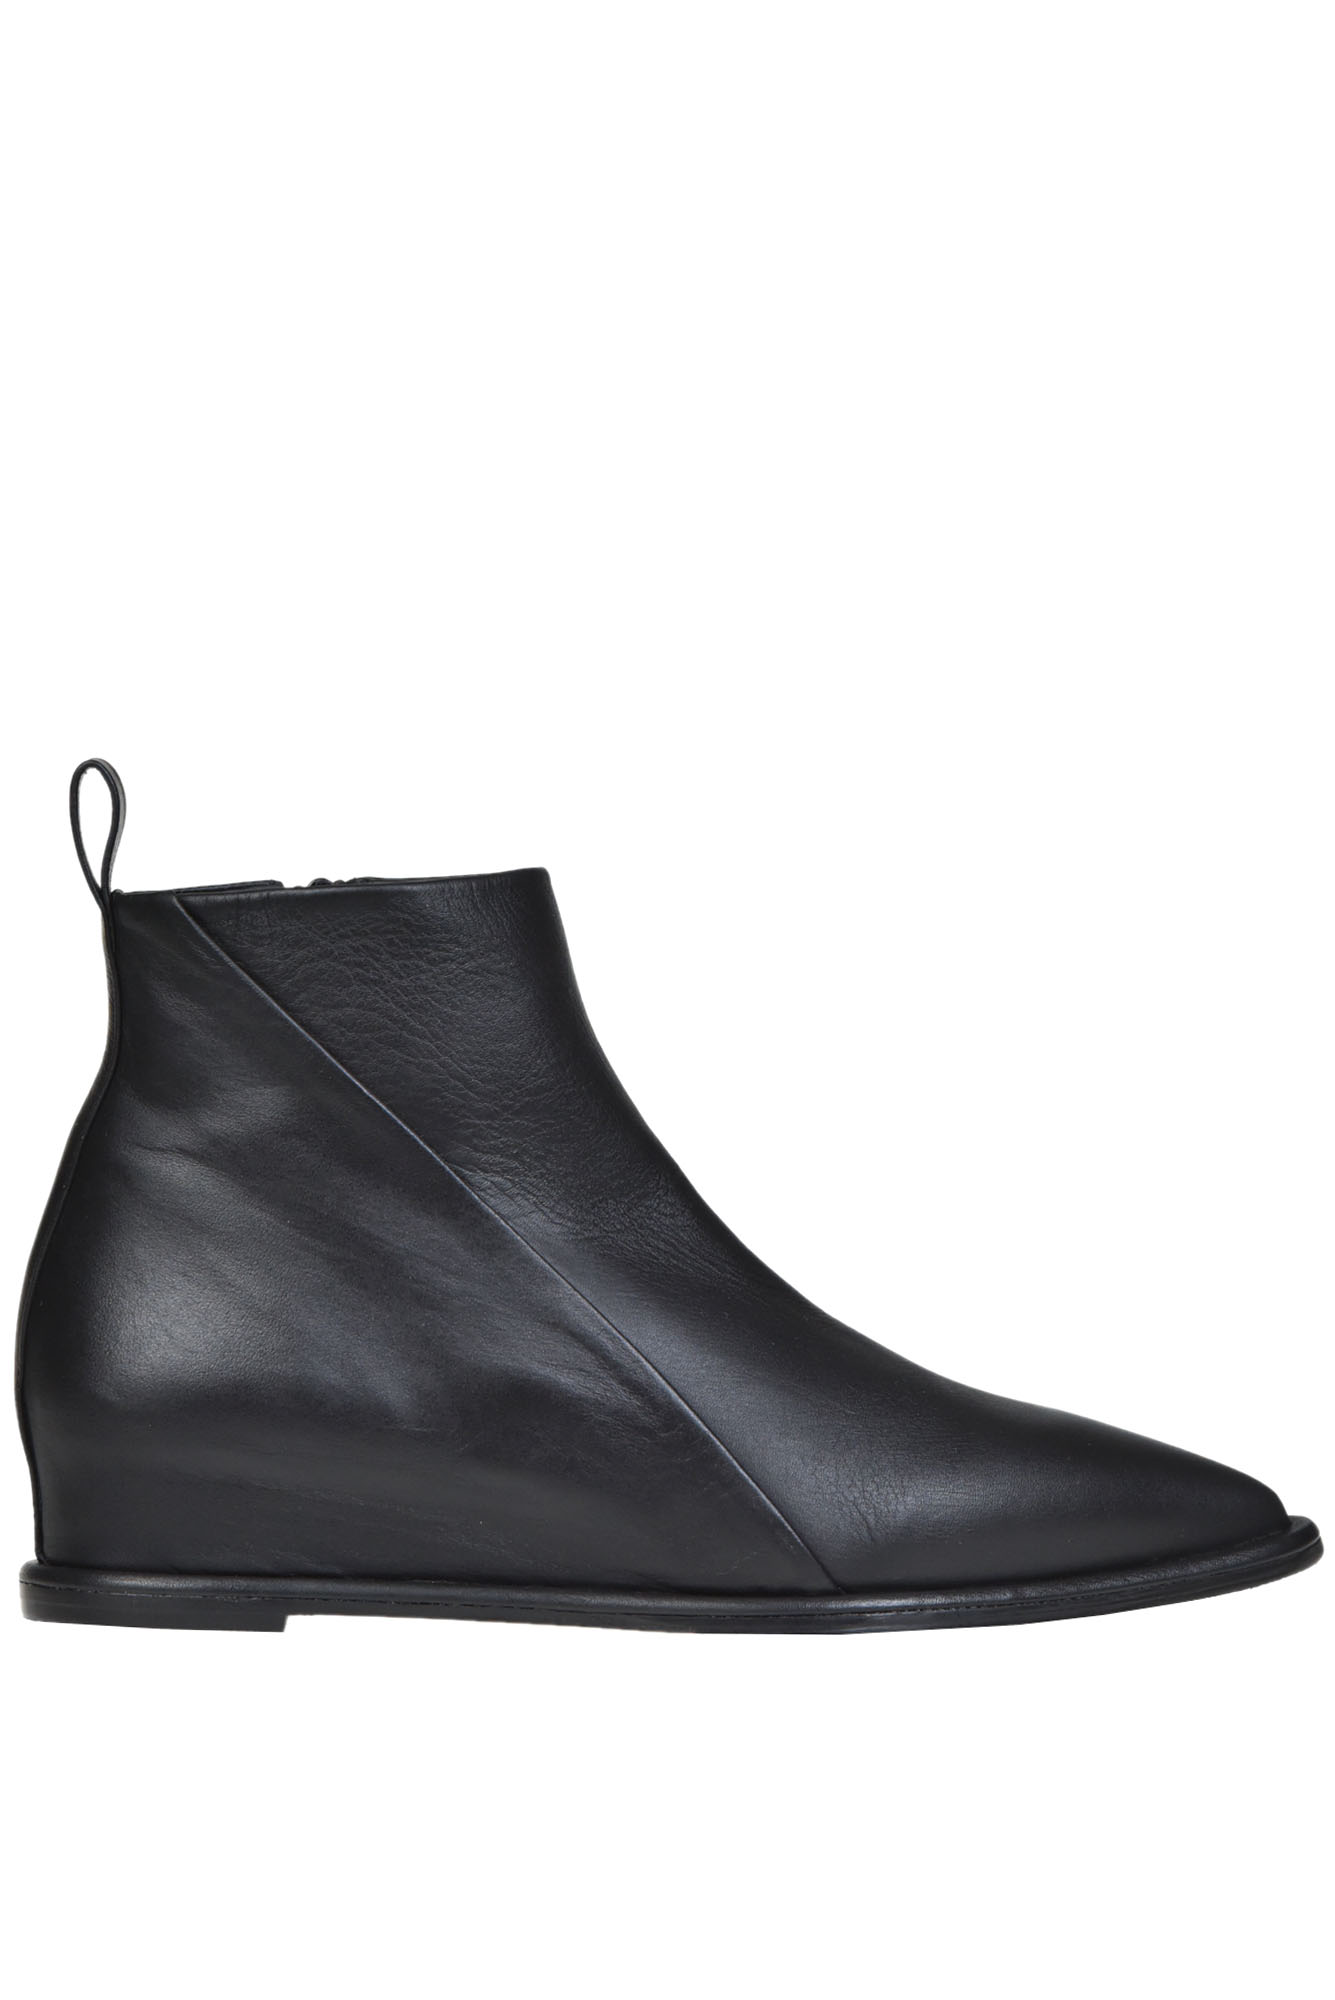 EQÜITARE SOPHIE ANKLE BOOTS